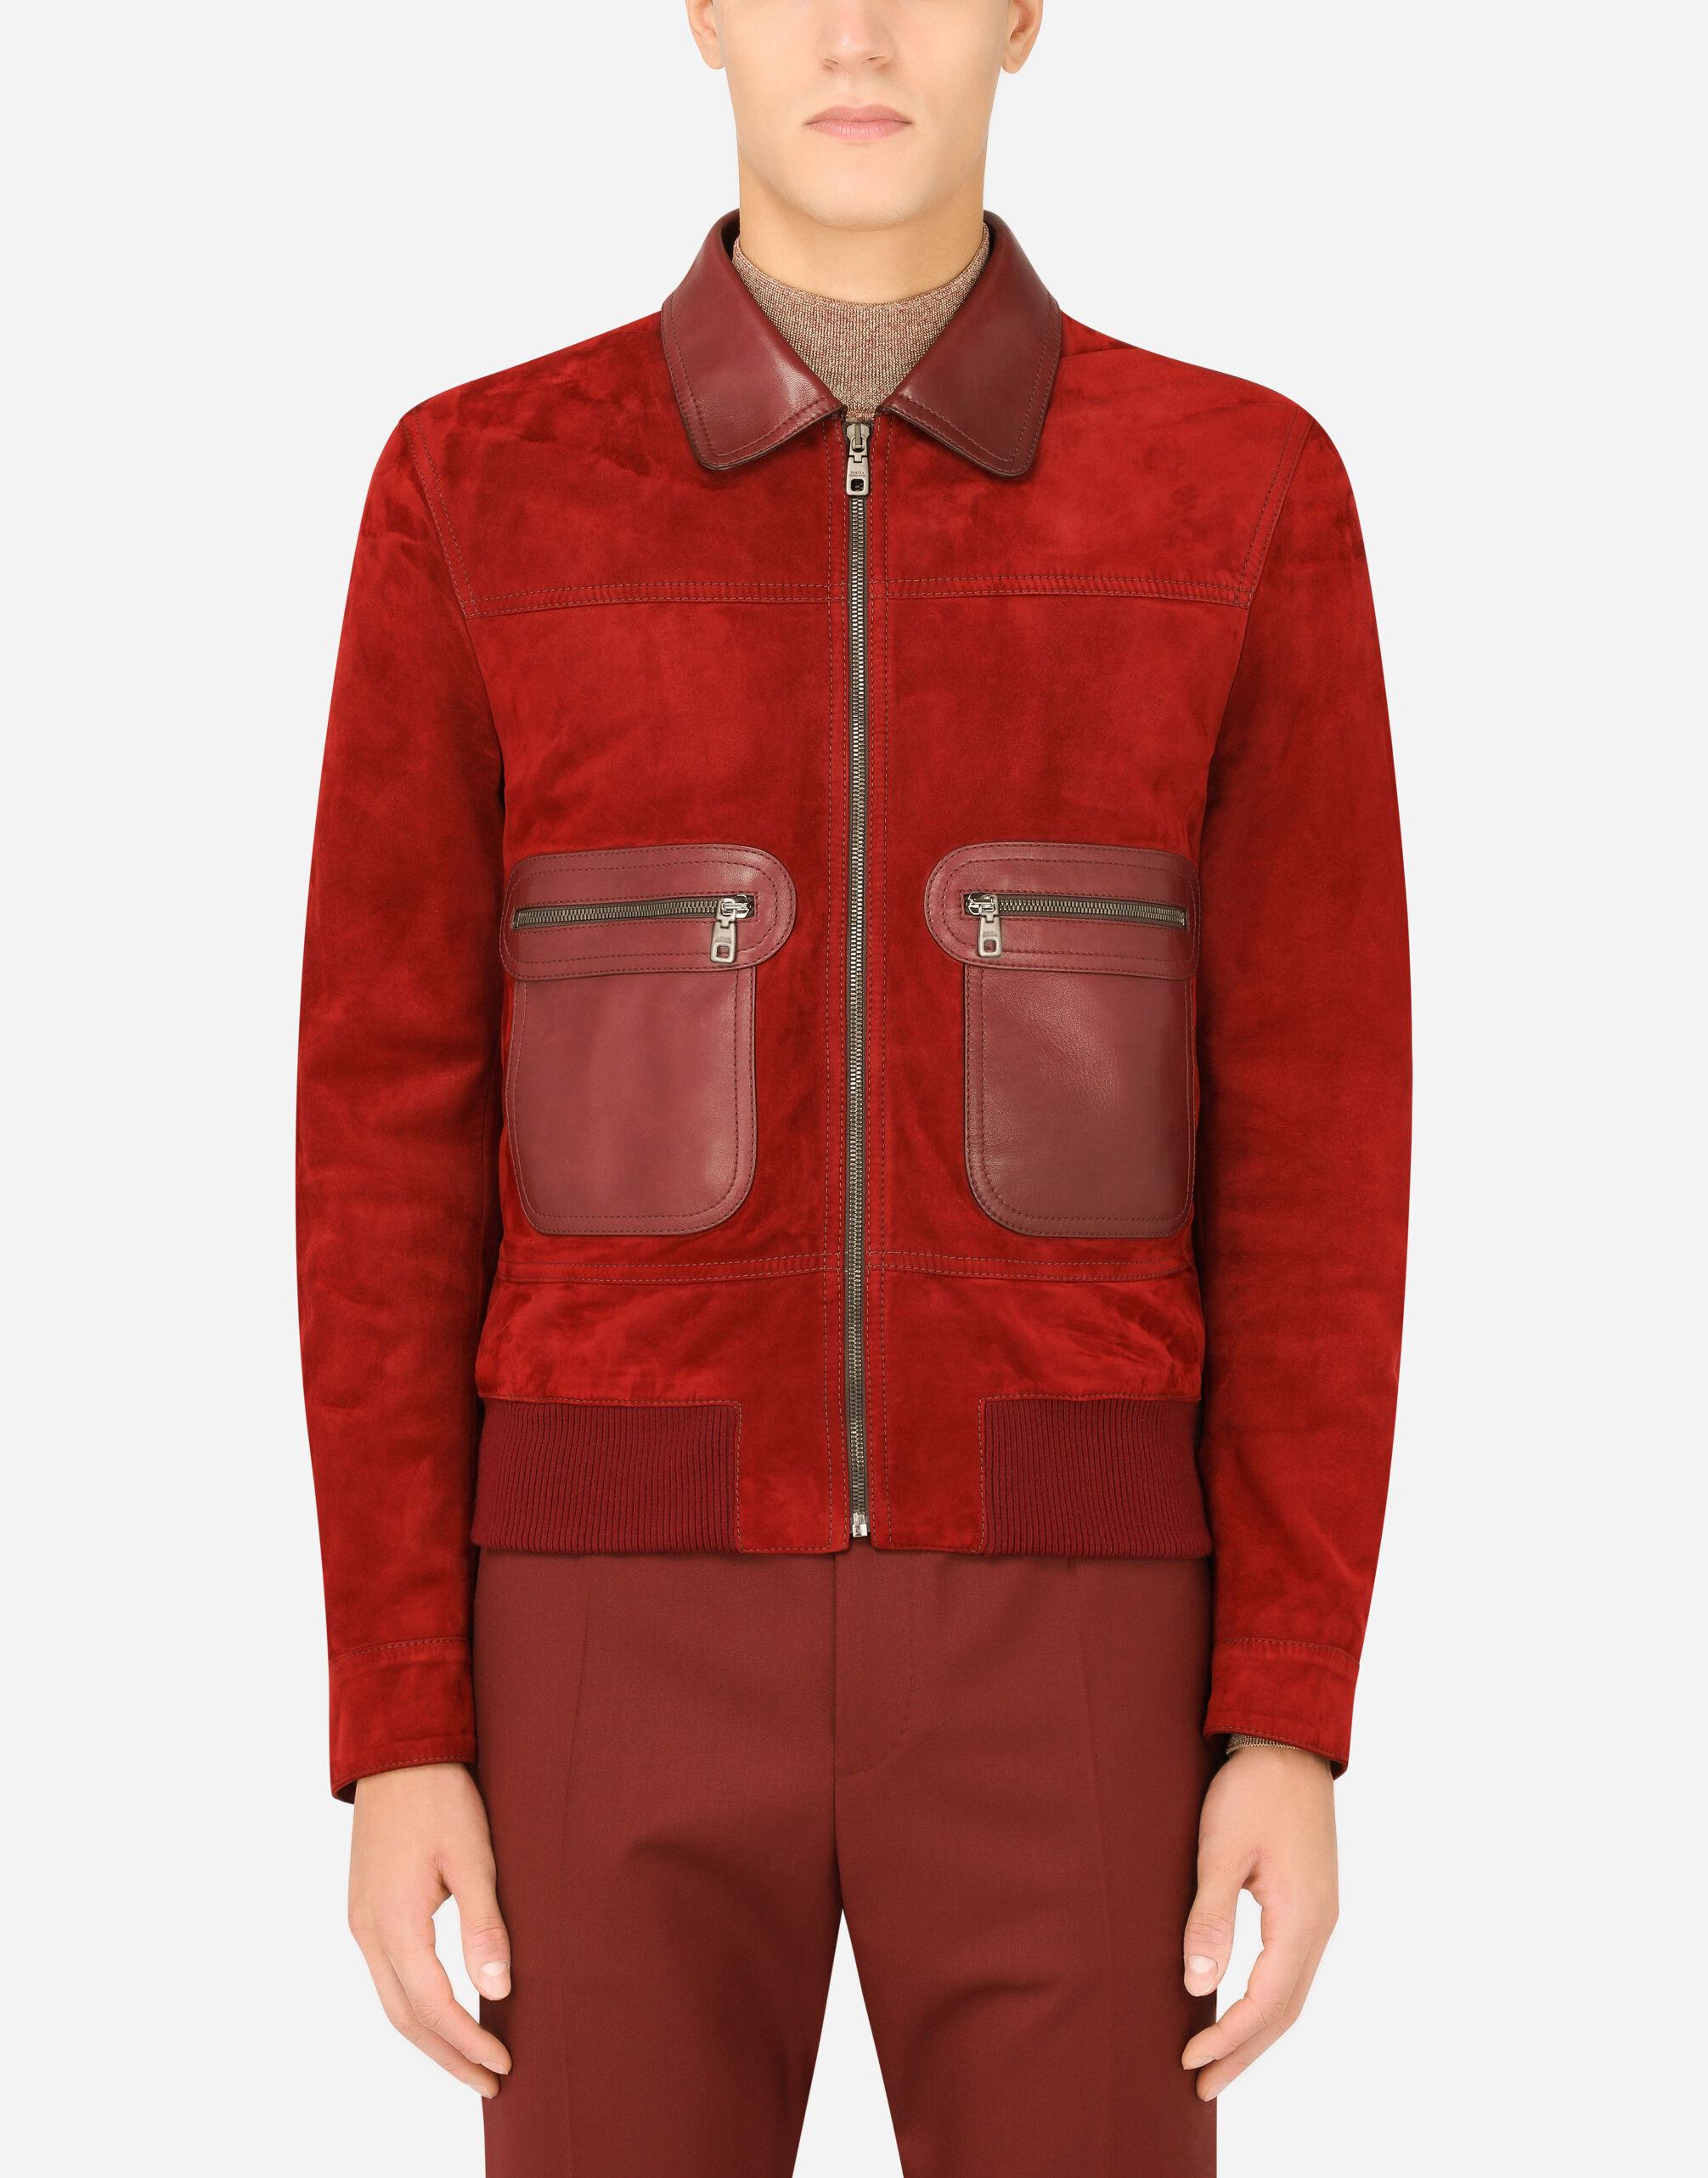 Do not do it Nonsense Monarchy Dolce & Gabbana Suede Jacket in Red for Men | Lyst